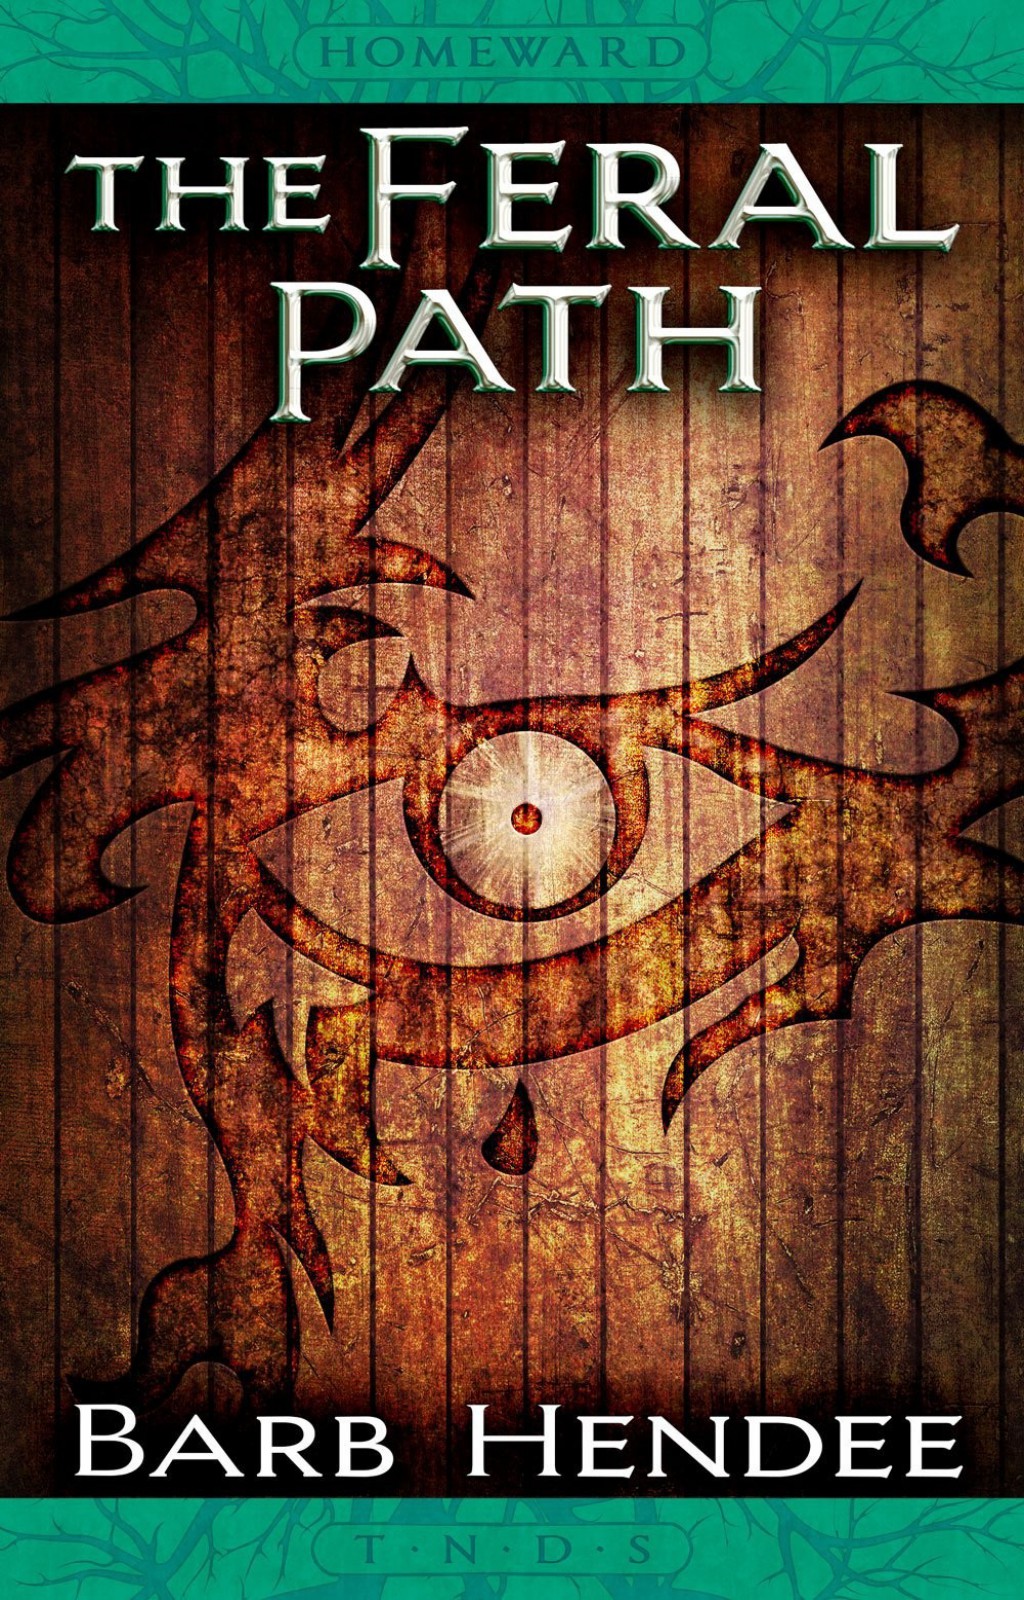 The Feral Path